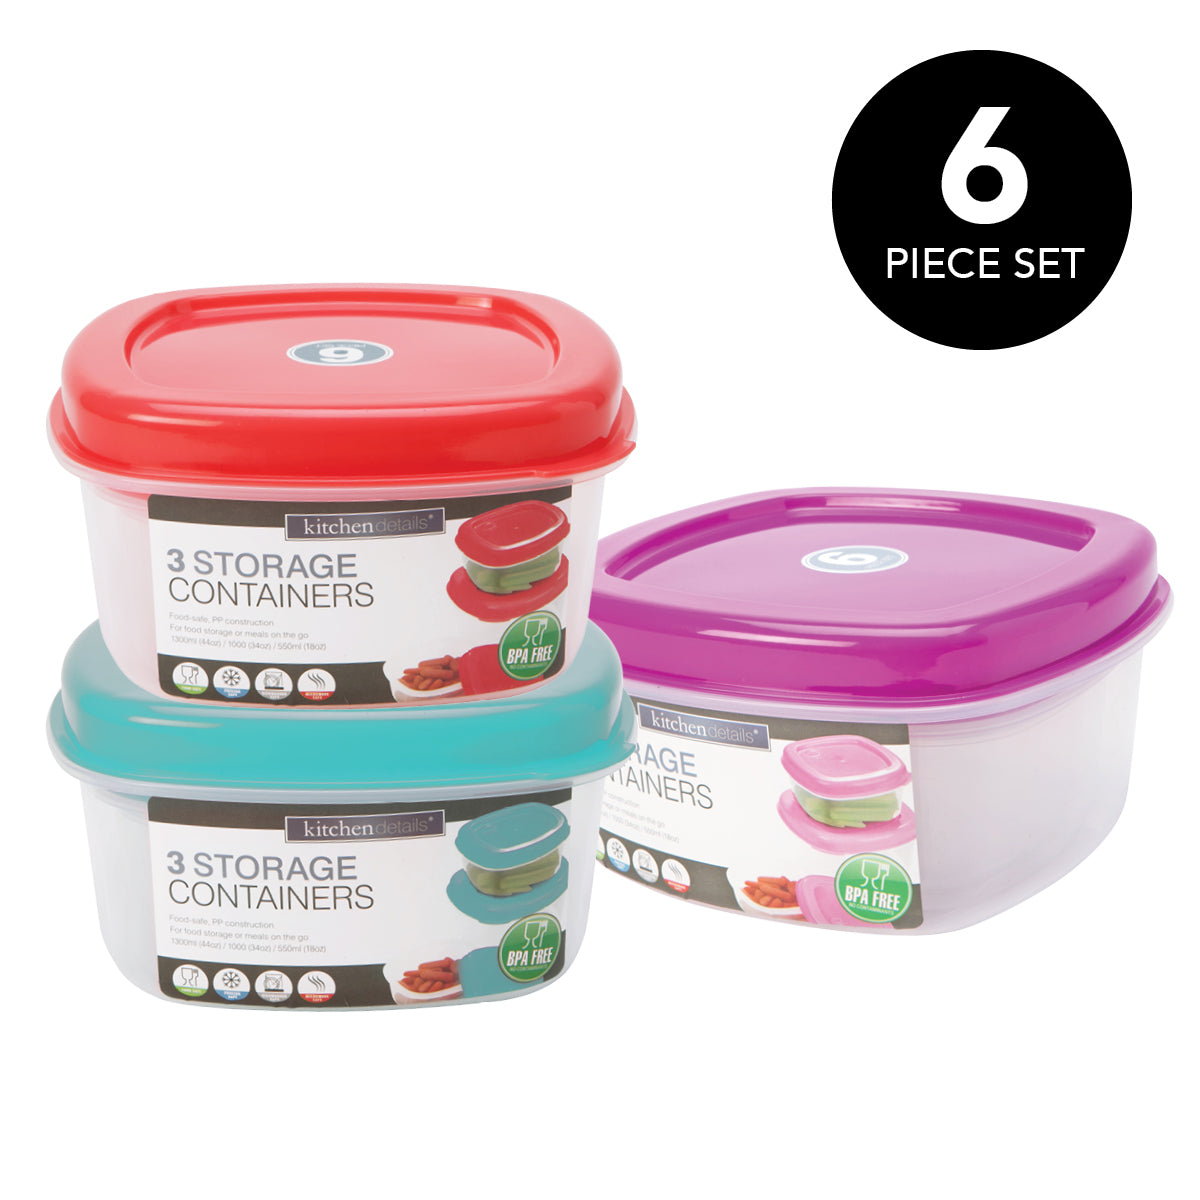 Food Storage Containers with Lids - Food Containers Meal Prep Plastic Containers with Lids Food Prep Containers Containers with Lids Freezer Containers by Prep Naturals, 25 Ounce, 6 Pack